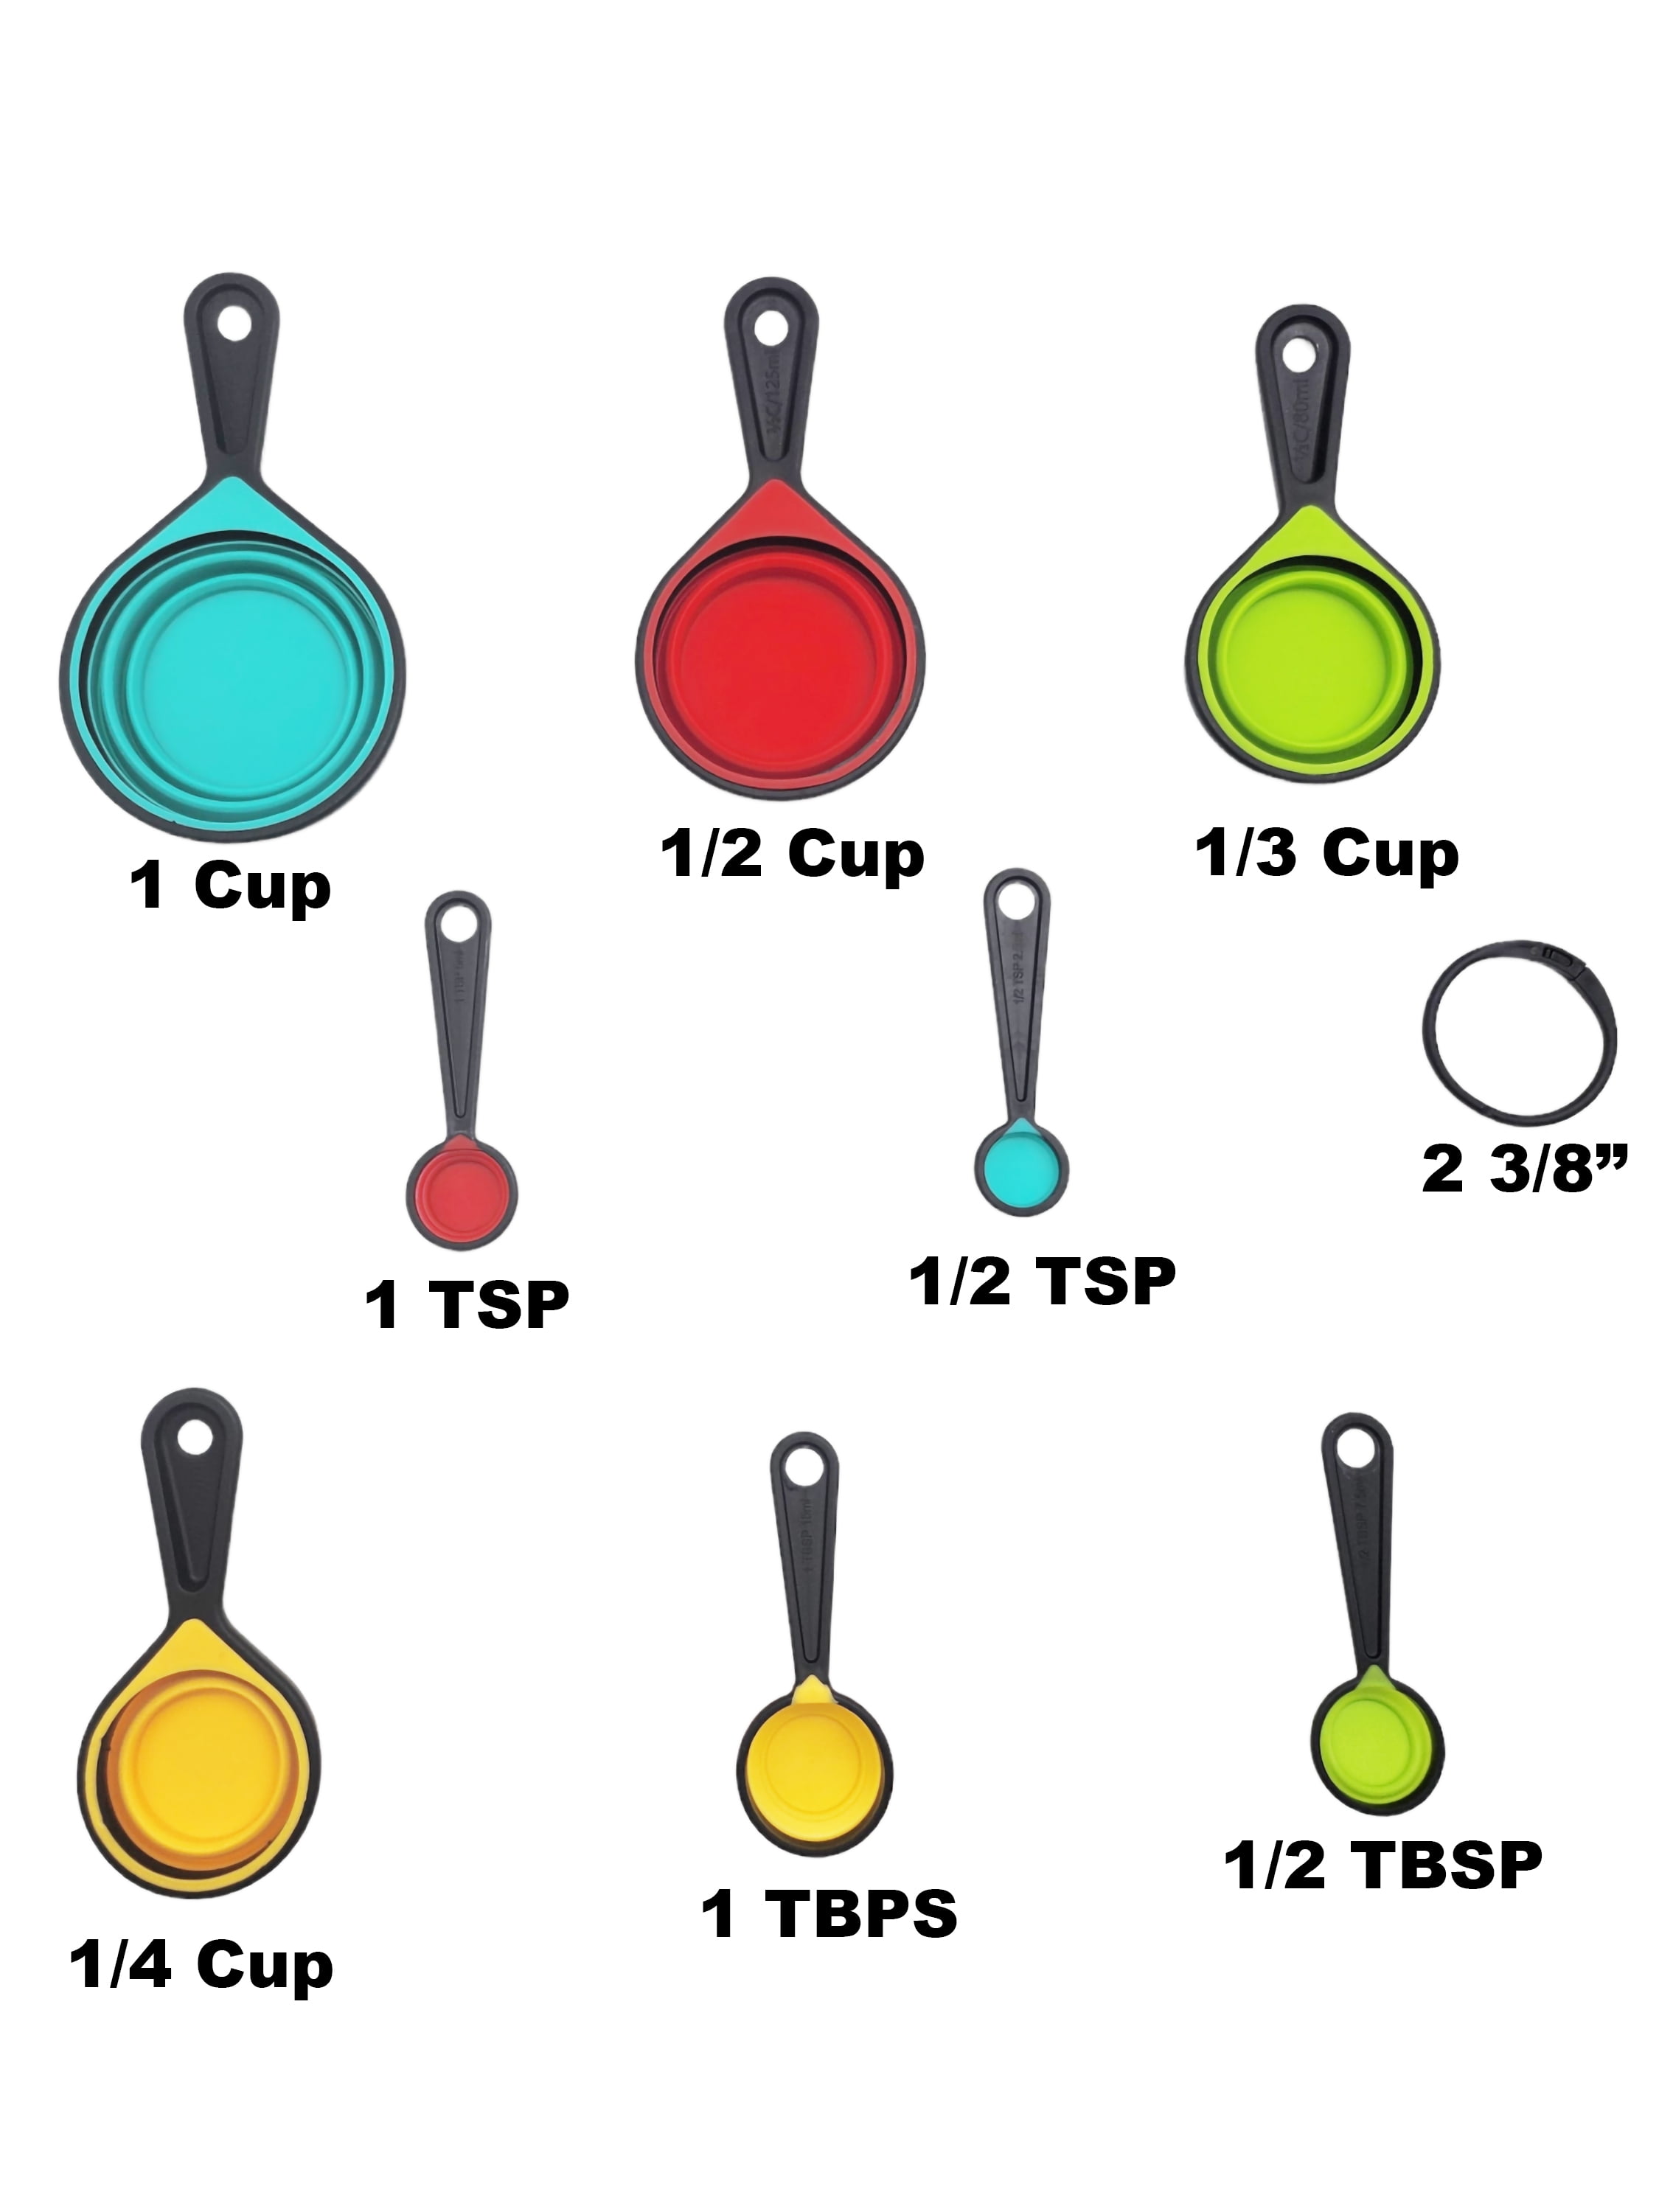 Kaptron Tools Spoons and Collapsible Measuring Cups Set 8 Pieces, Multiple  Sizes, Multicolor